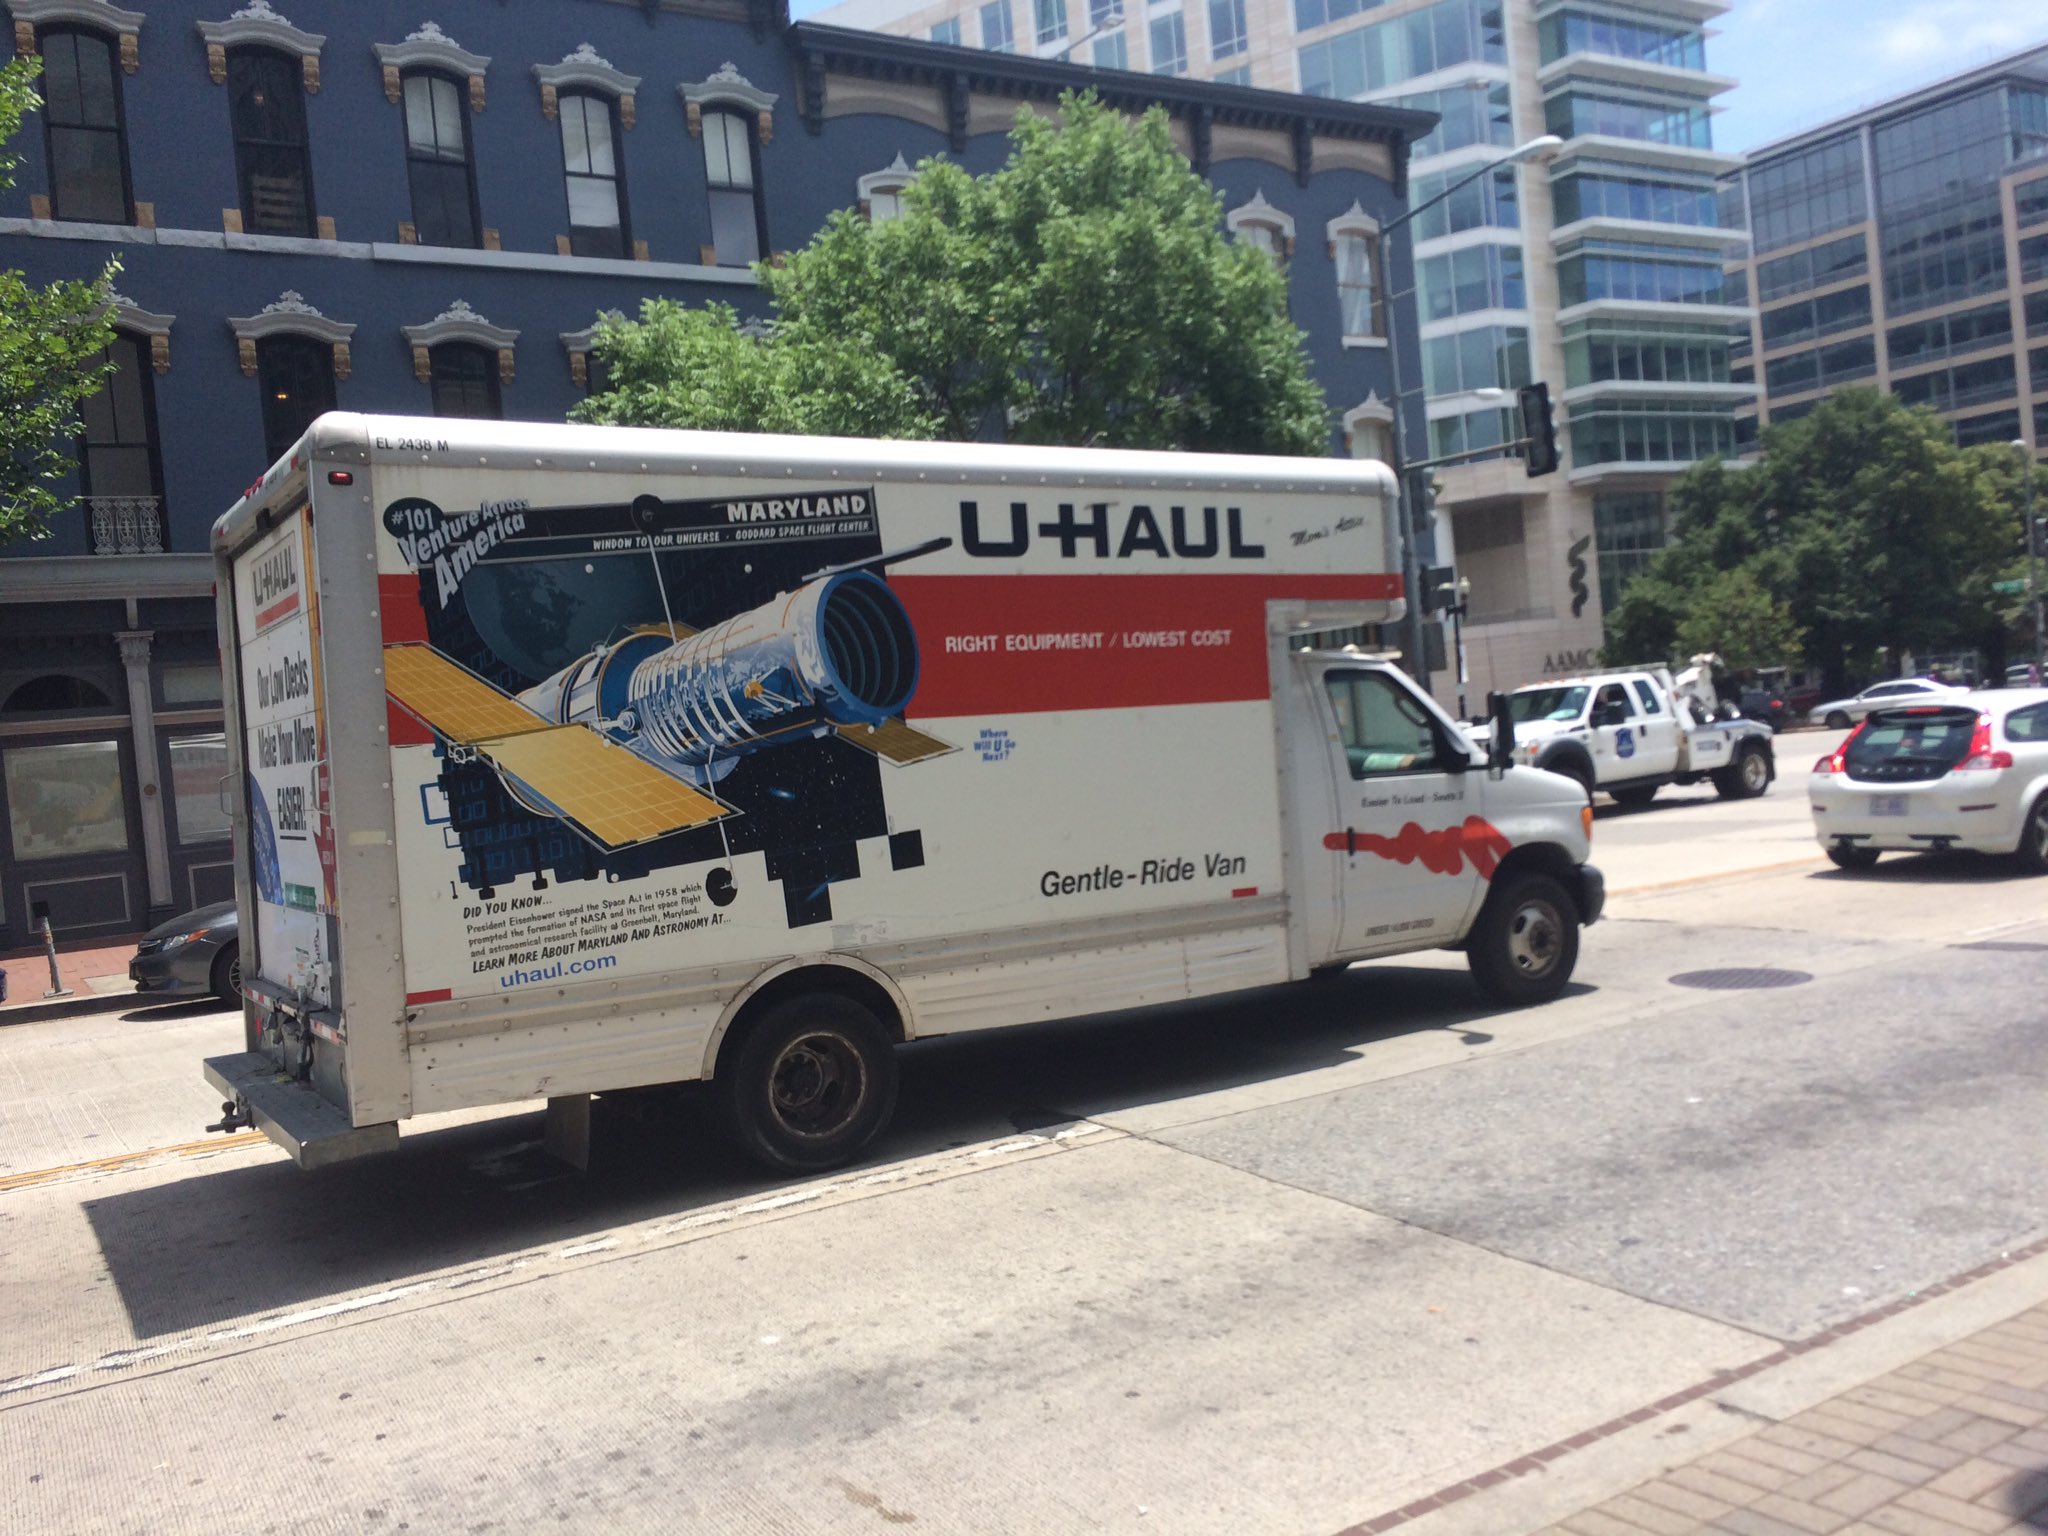 A rental truck on a city street that has a Hubble Space Telescope painted on its side